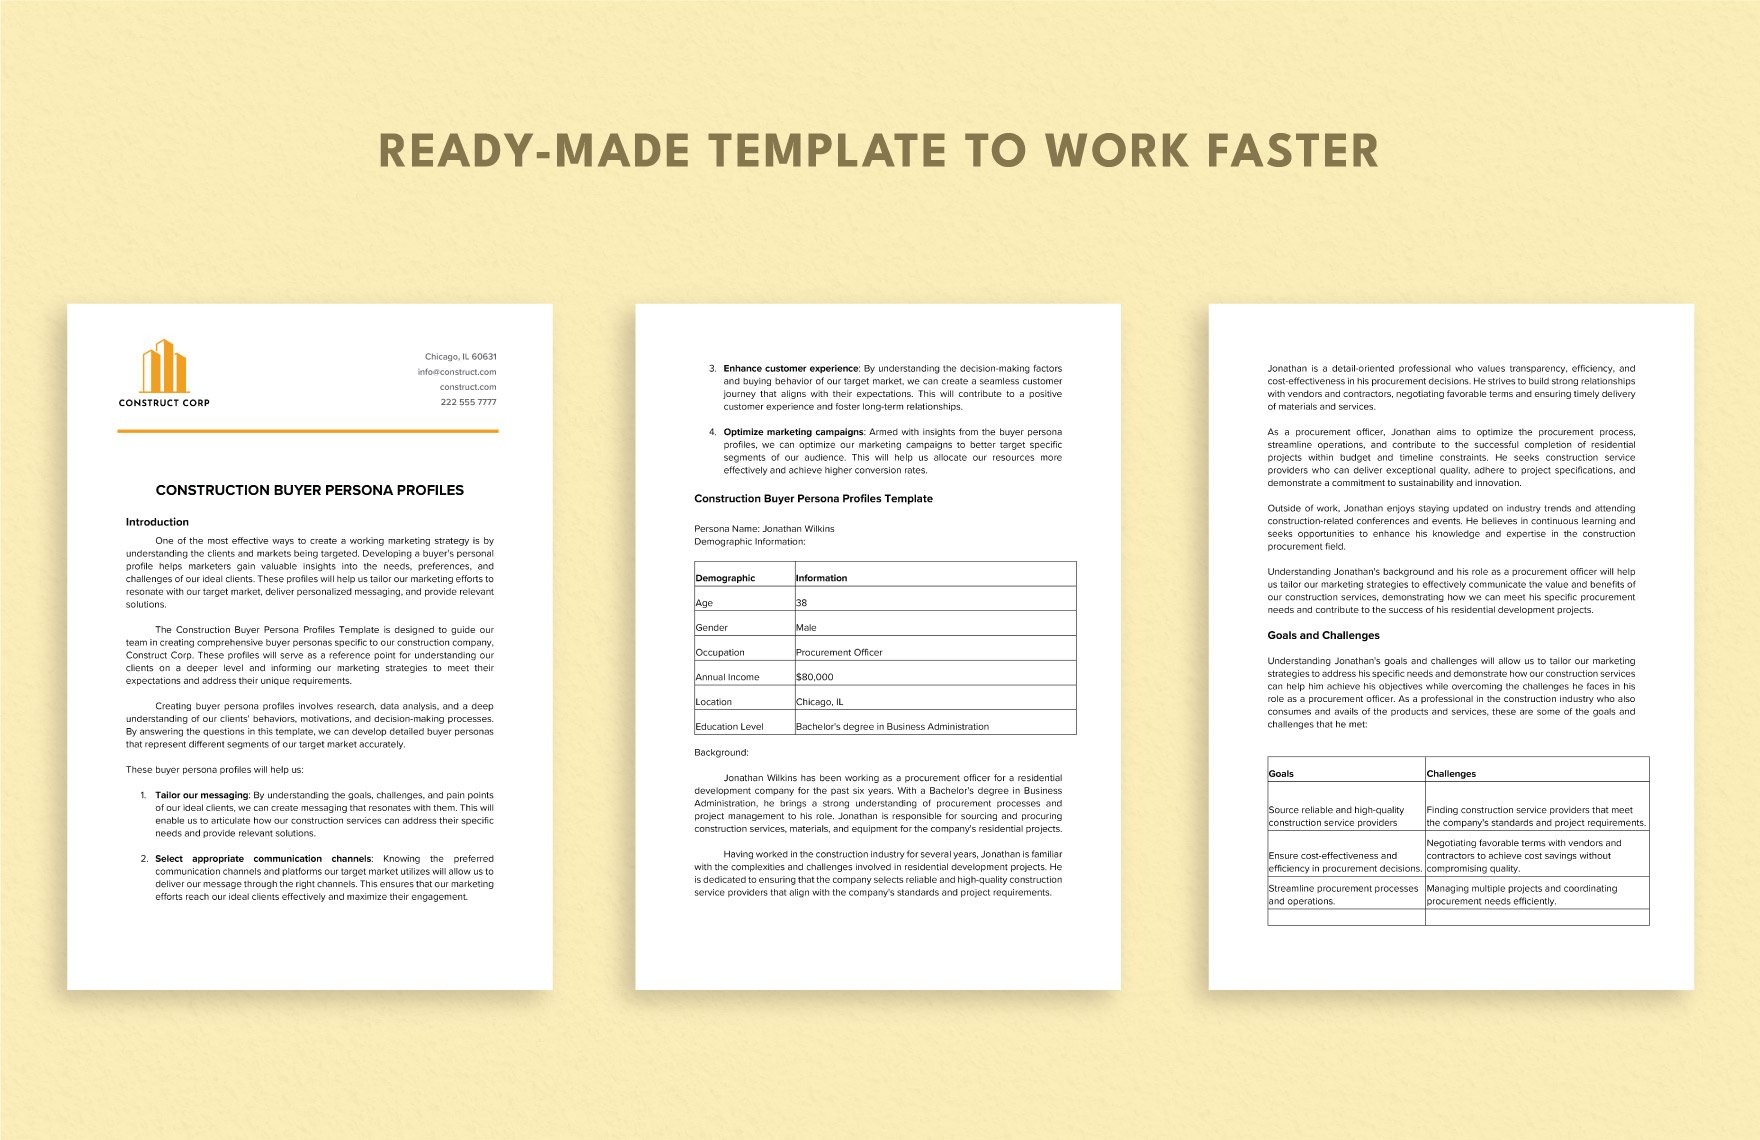 Construction Buyer Persona Profiles Template